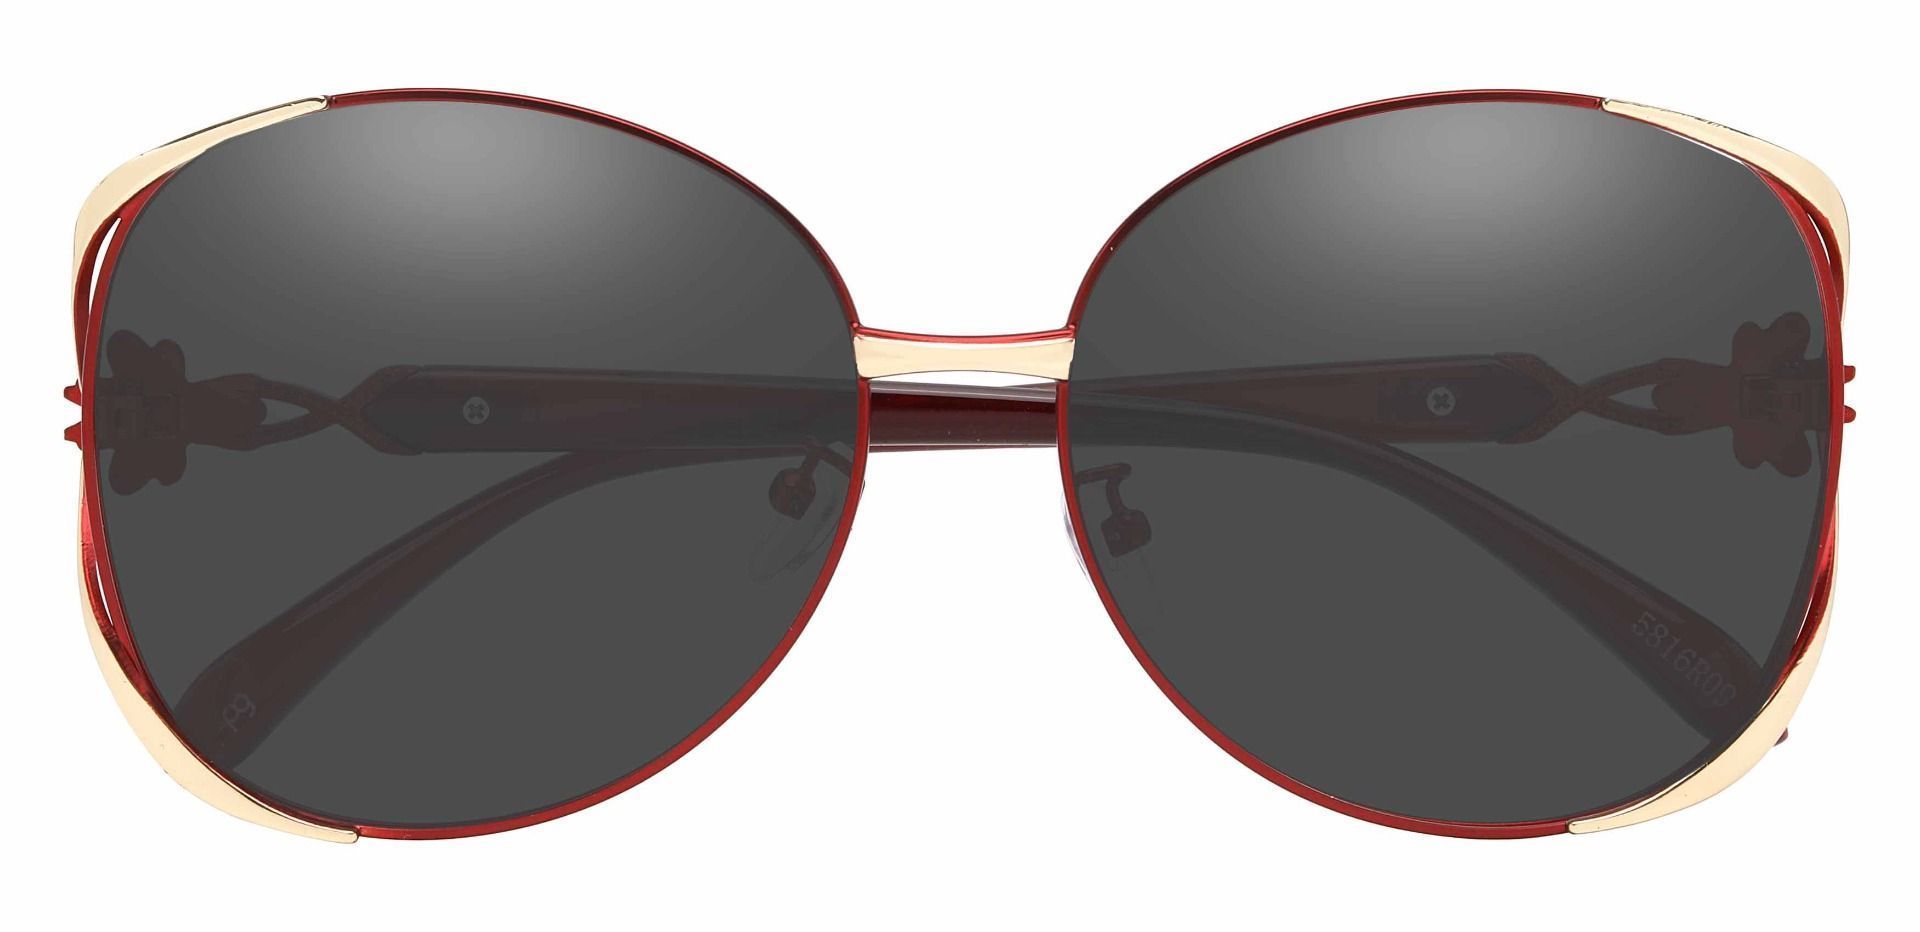 Nina Round Non-Rx Sunglasses - Red Frame With Gray Lenses